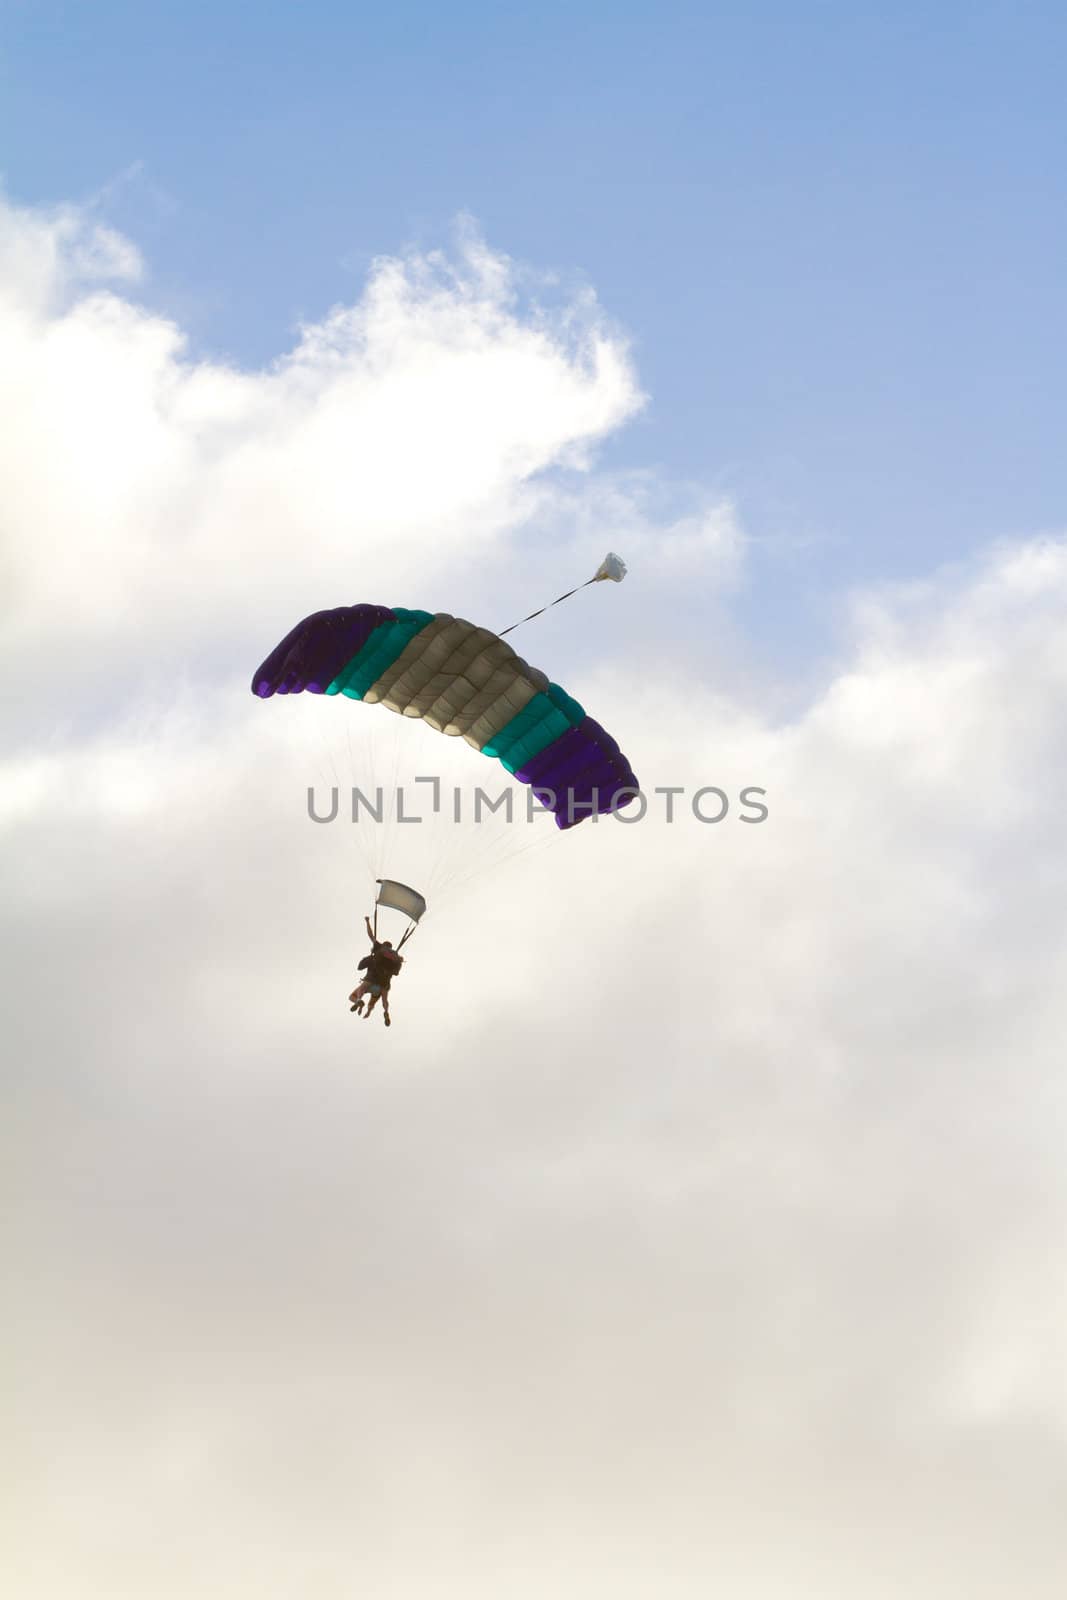 Skydiver Parachute Open by joshuaraineyphotography